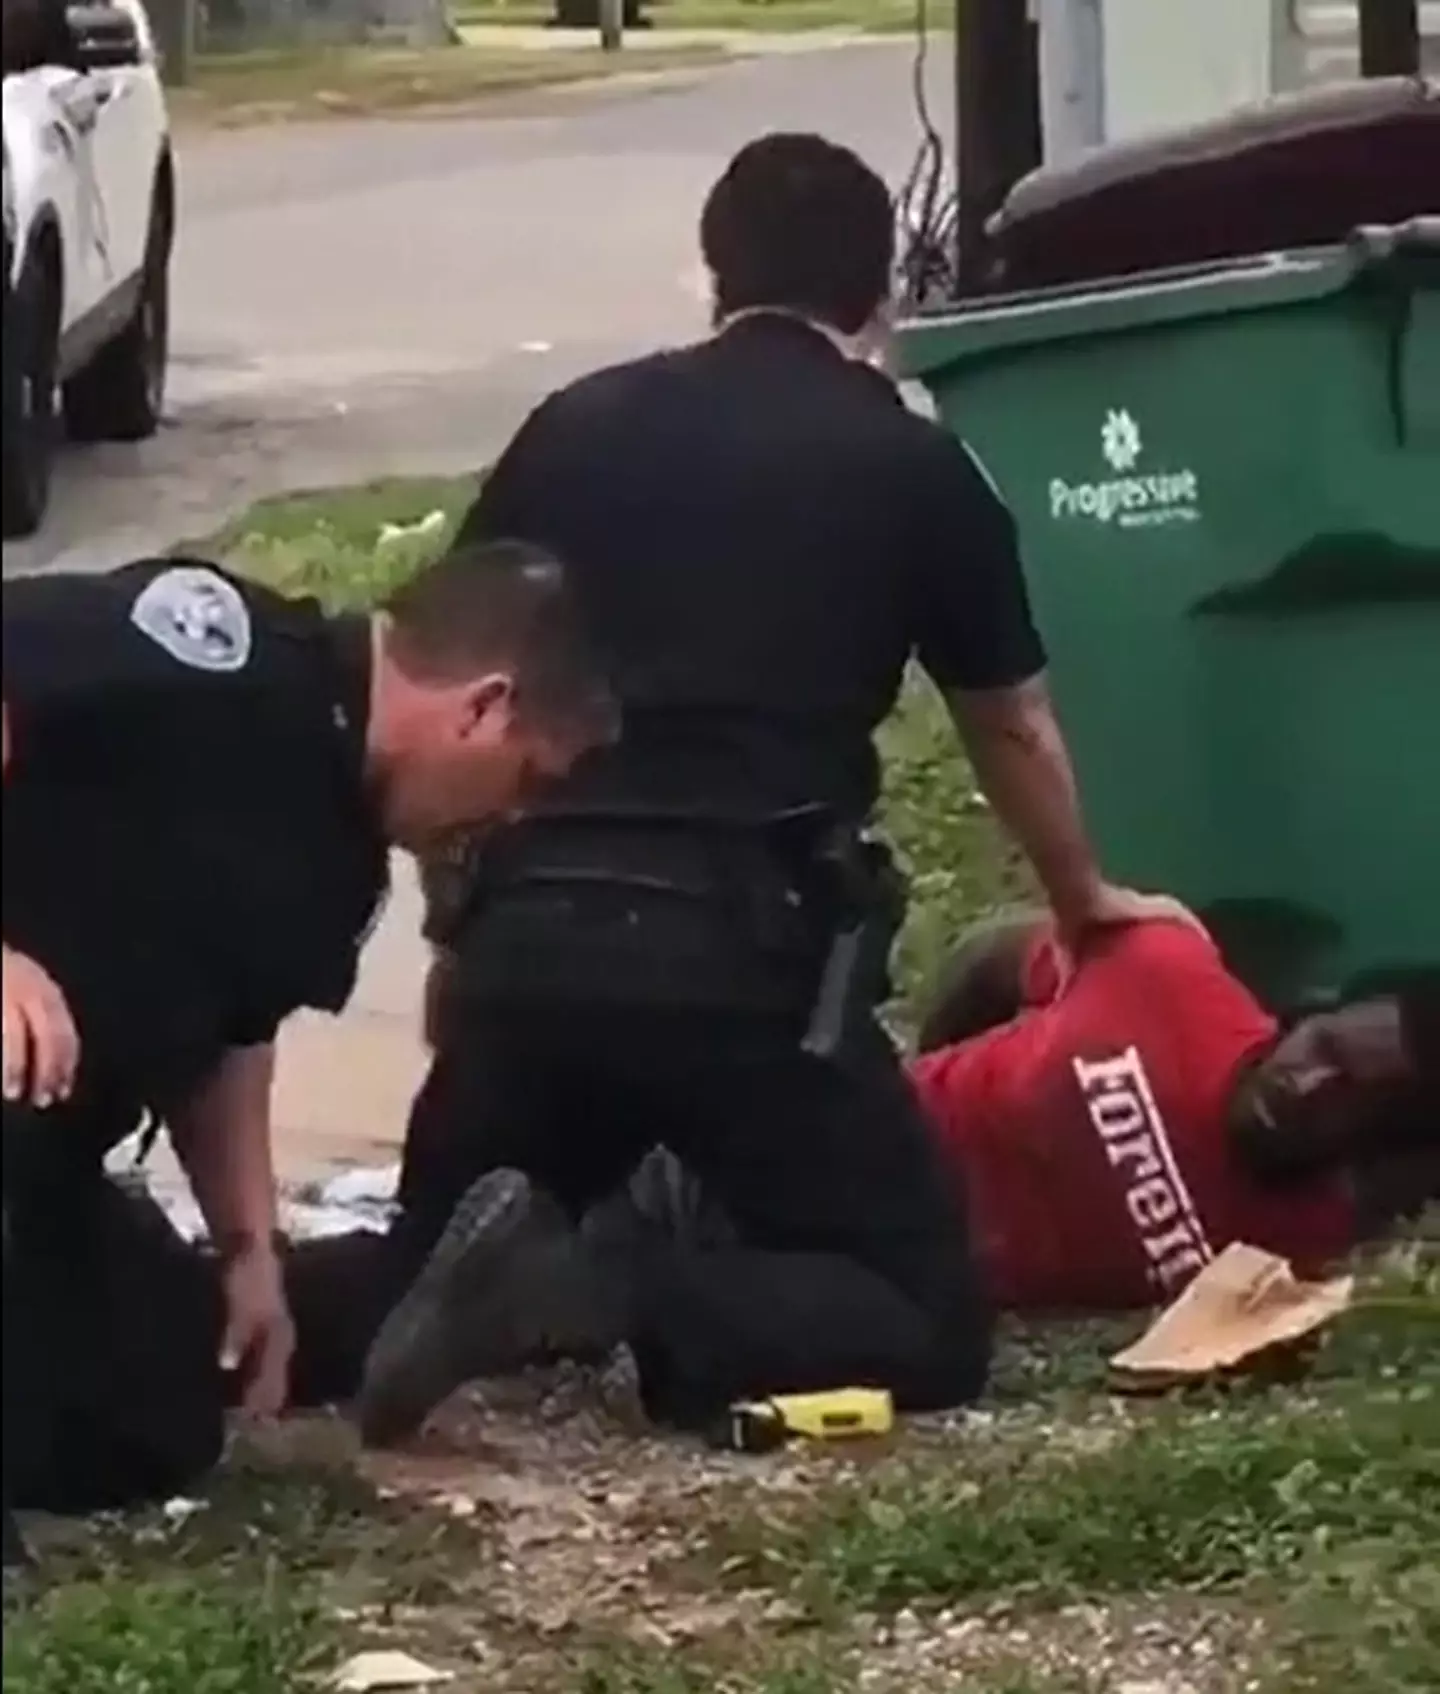 The viral video of an arrest made in 2020 had people claiming a police officer planted drugs near a suspect.